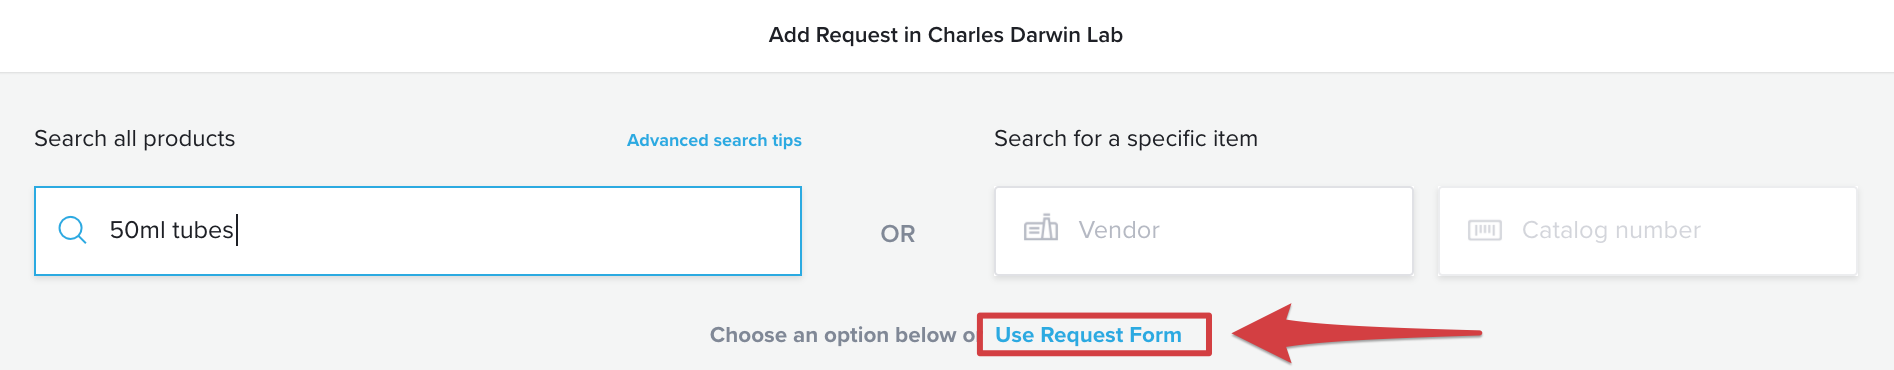 unified_search_use_request_form